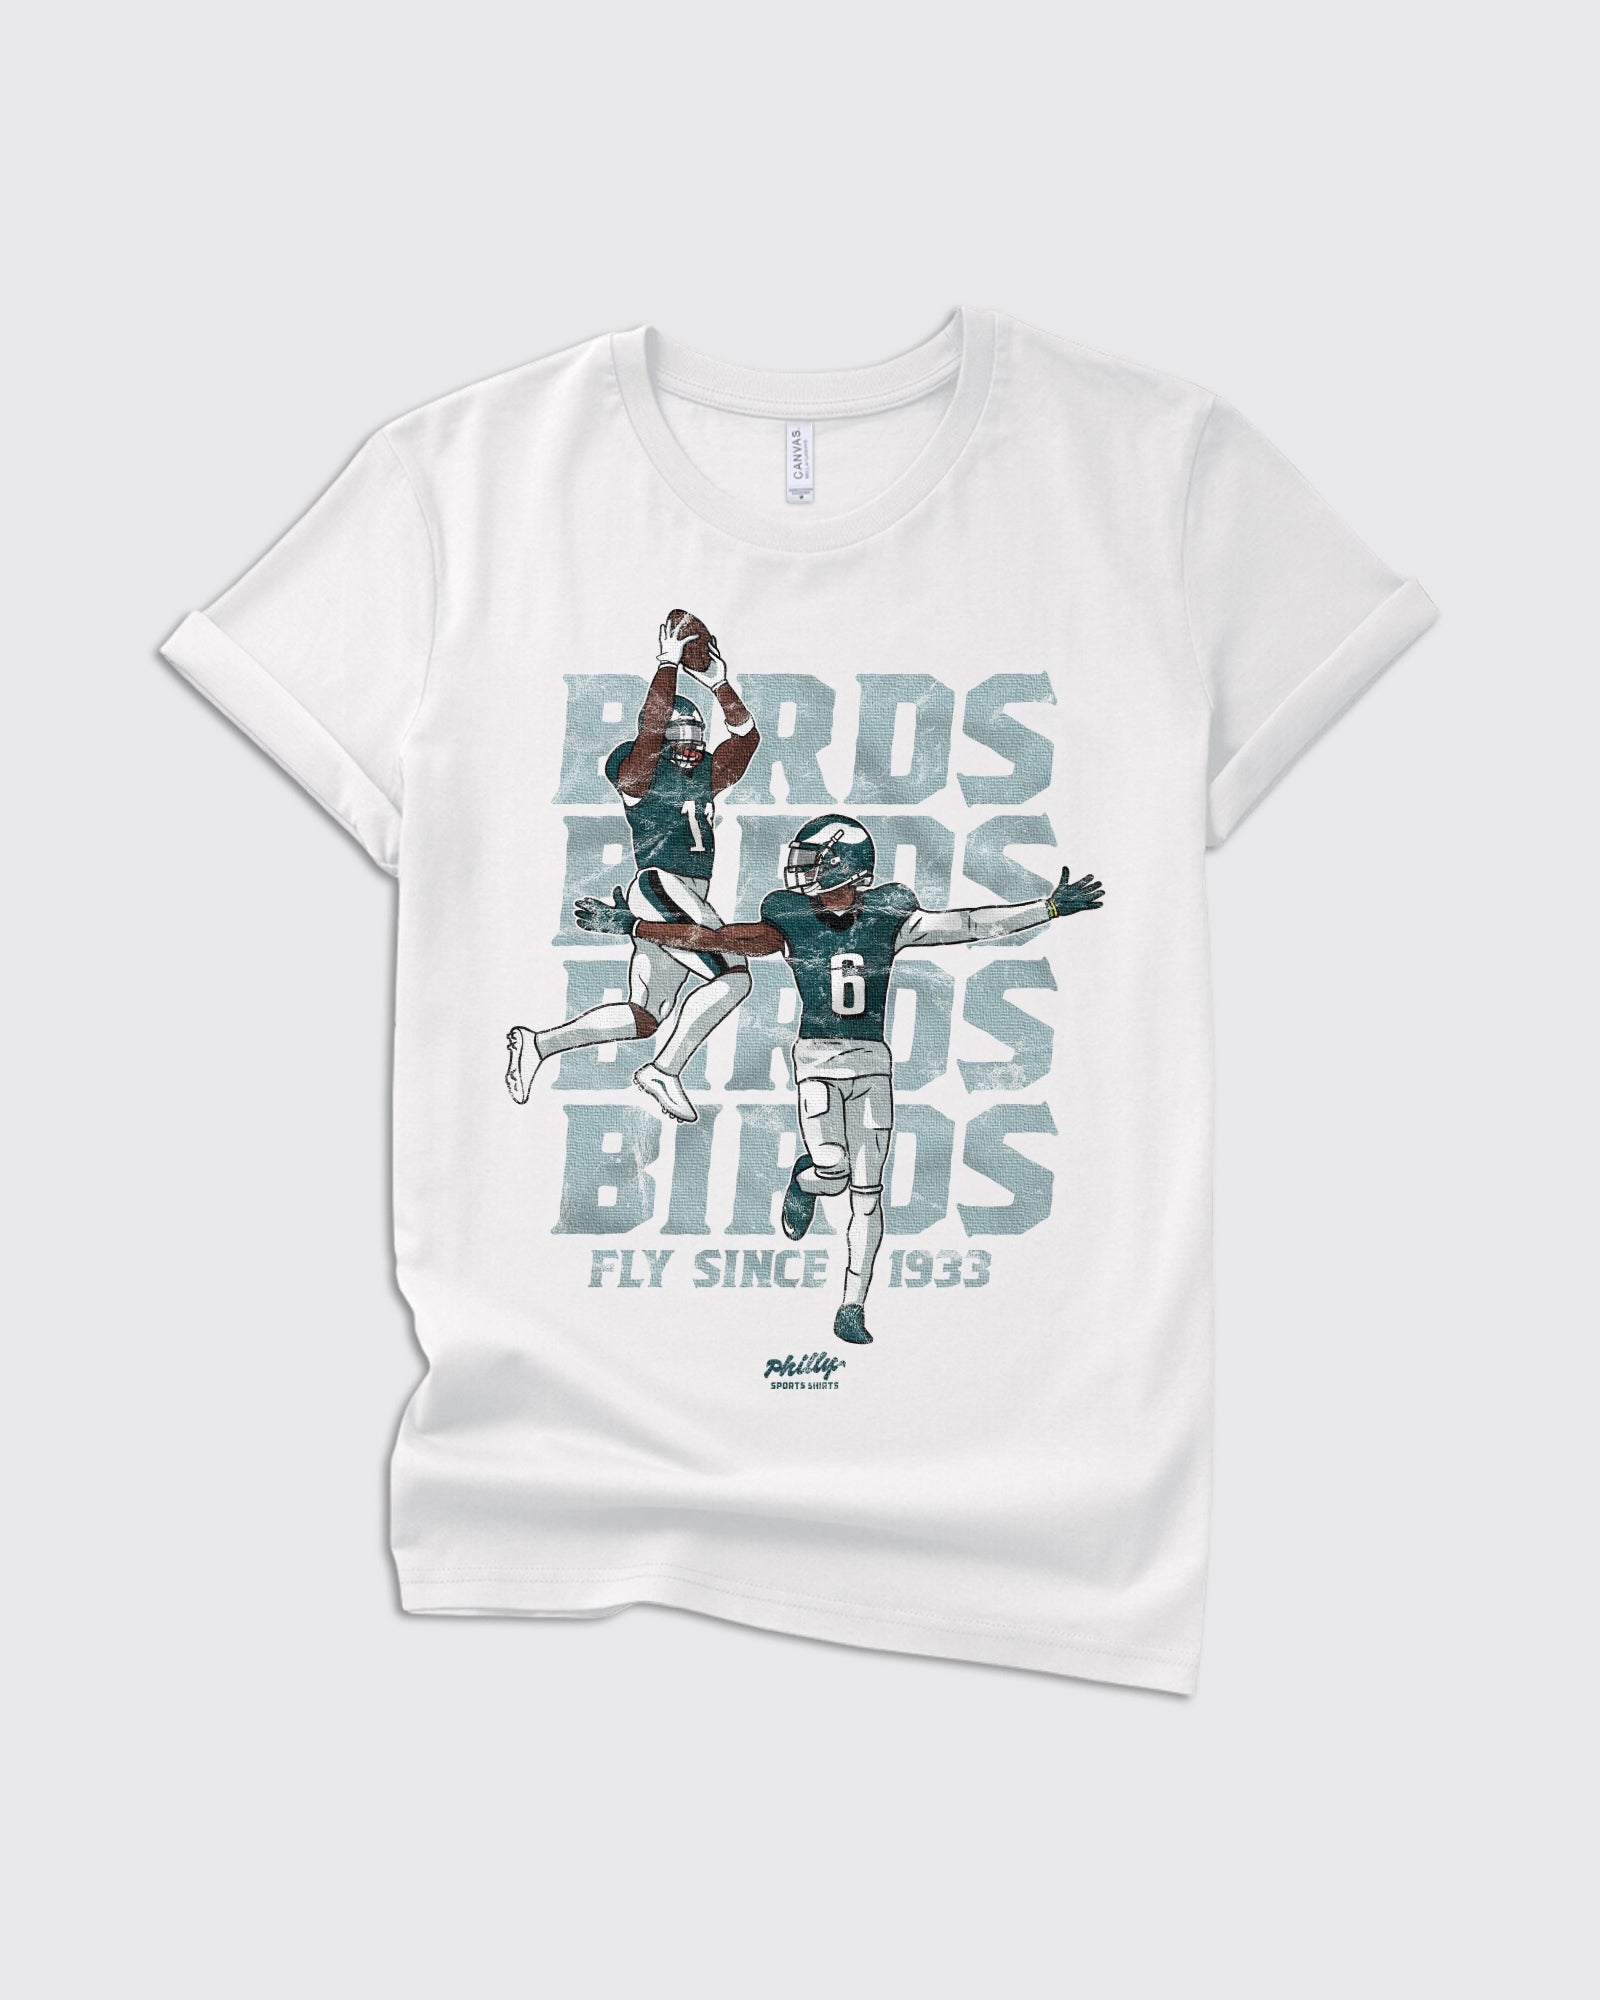 Kids Touchdown Celly Shirt - Eagles, Kids, T-Shirts - Philly Sports Shirts